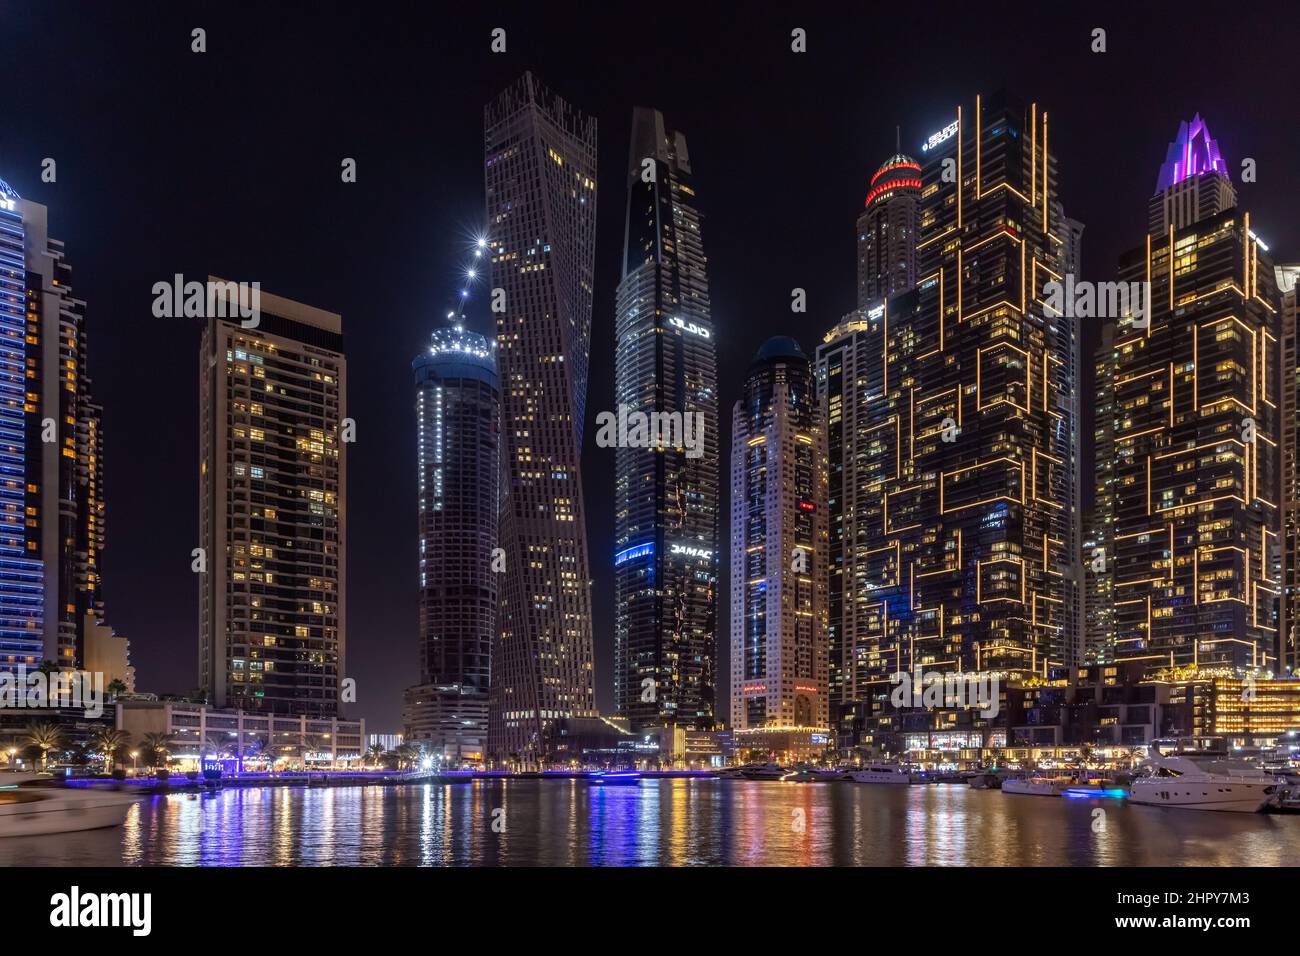 Skyline of skyscrapers at night, with skyscrapers, boats and reflections in the water, in the Marina district of Dubai, United Arab Emirates. Stock Photo